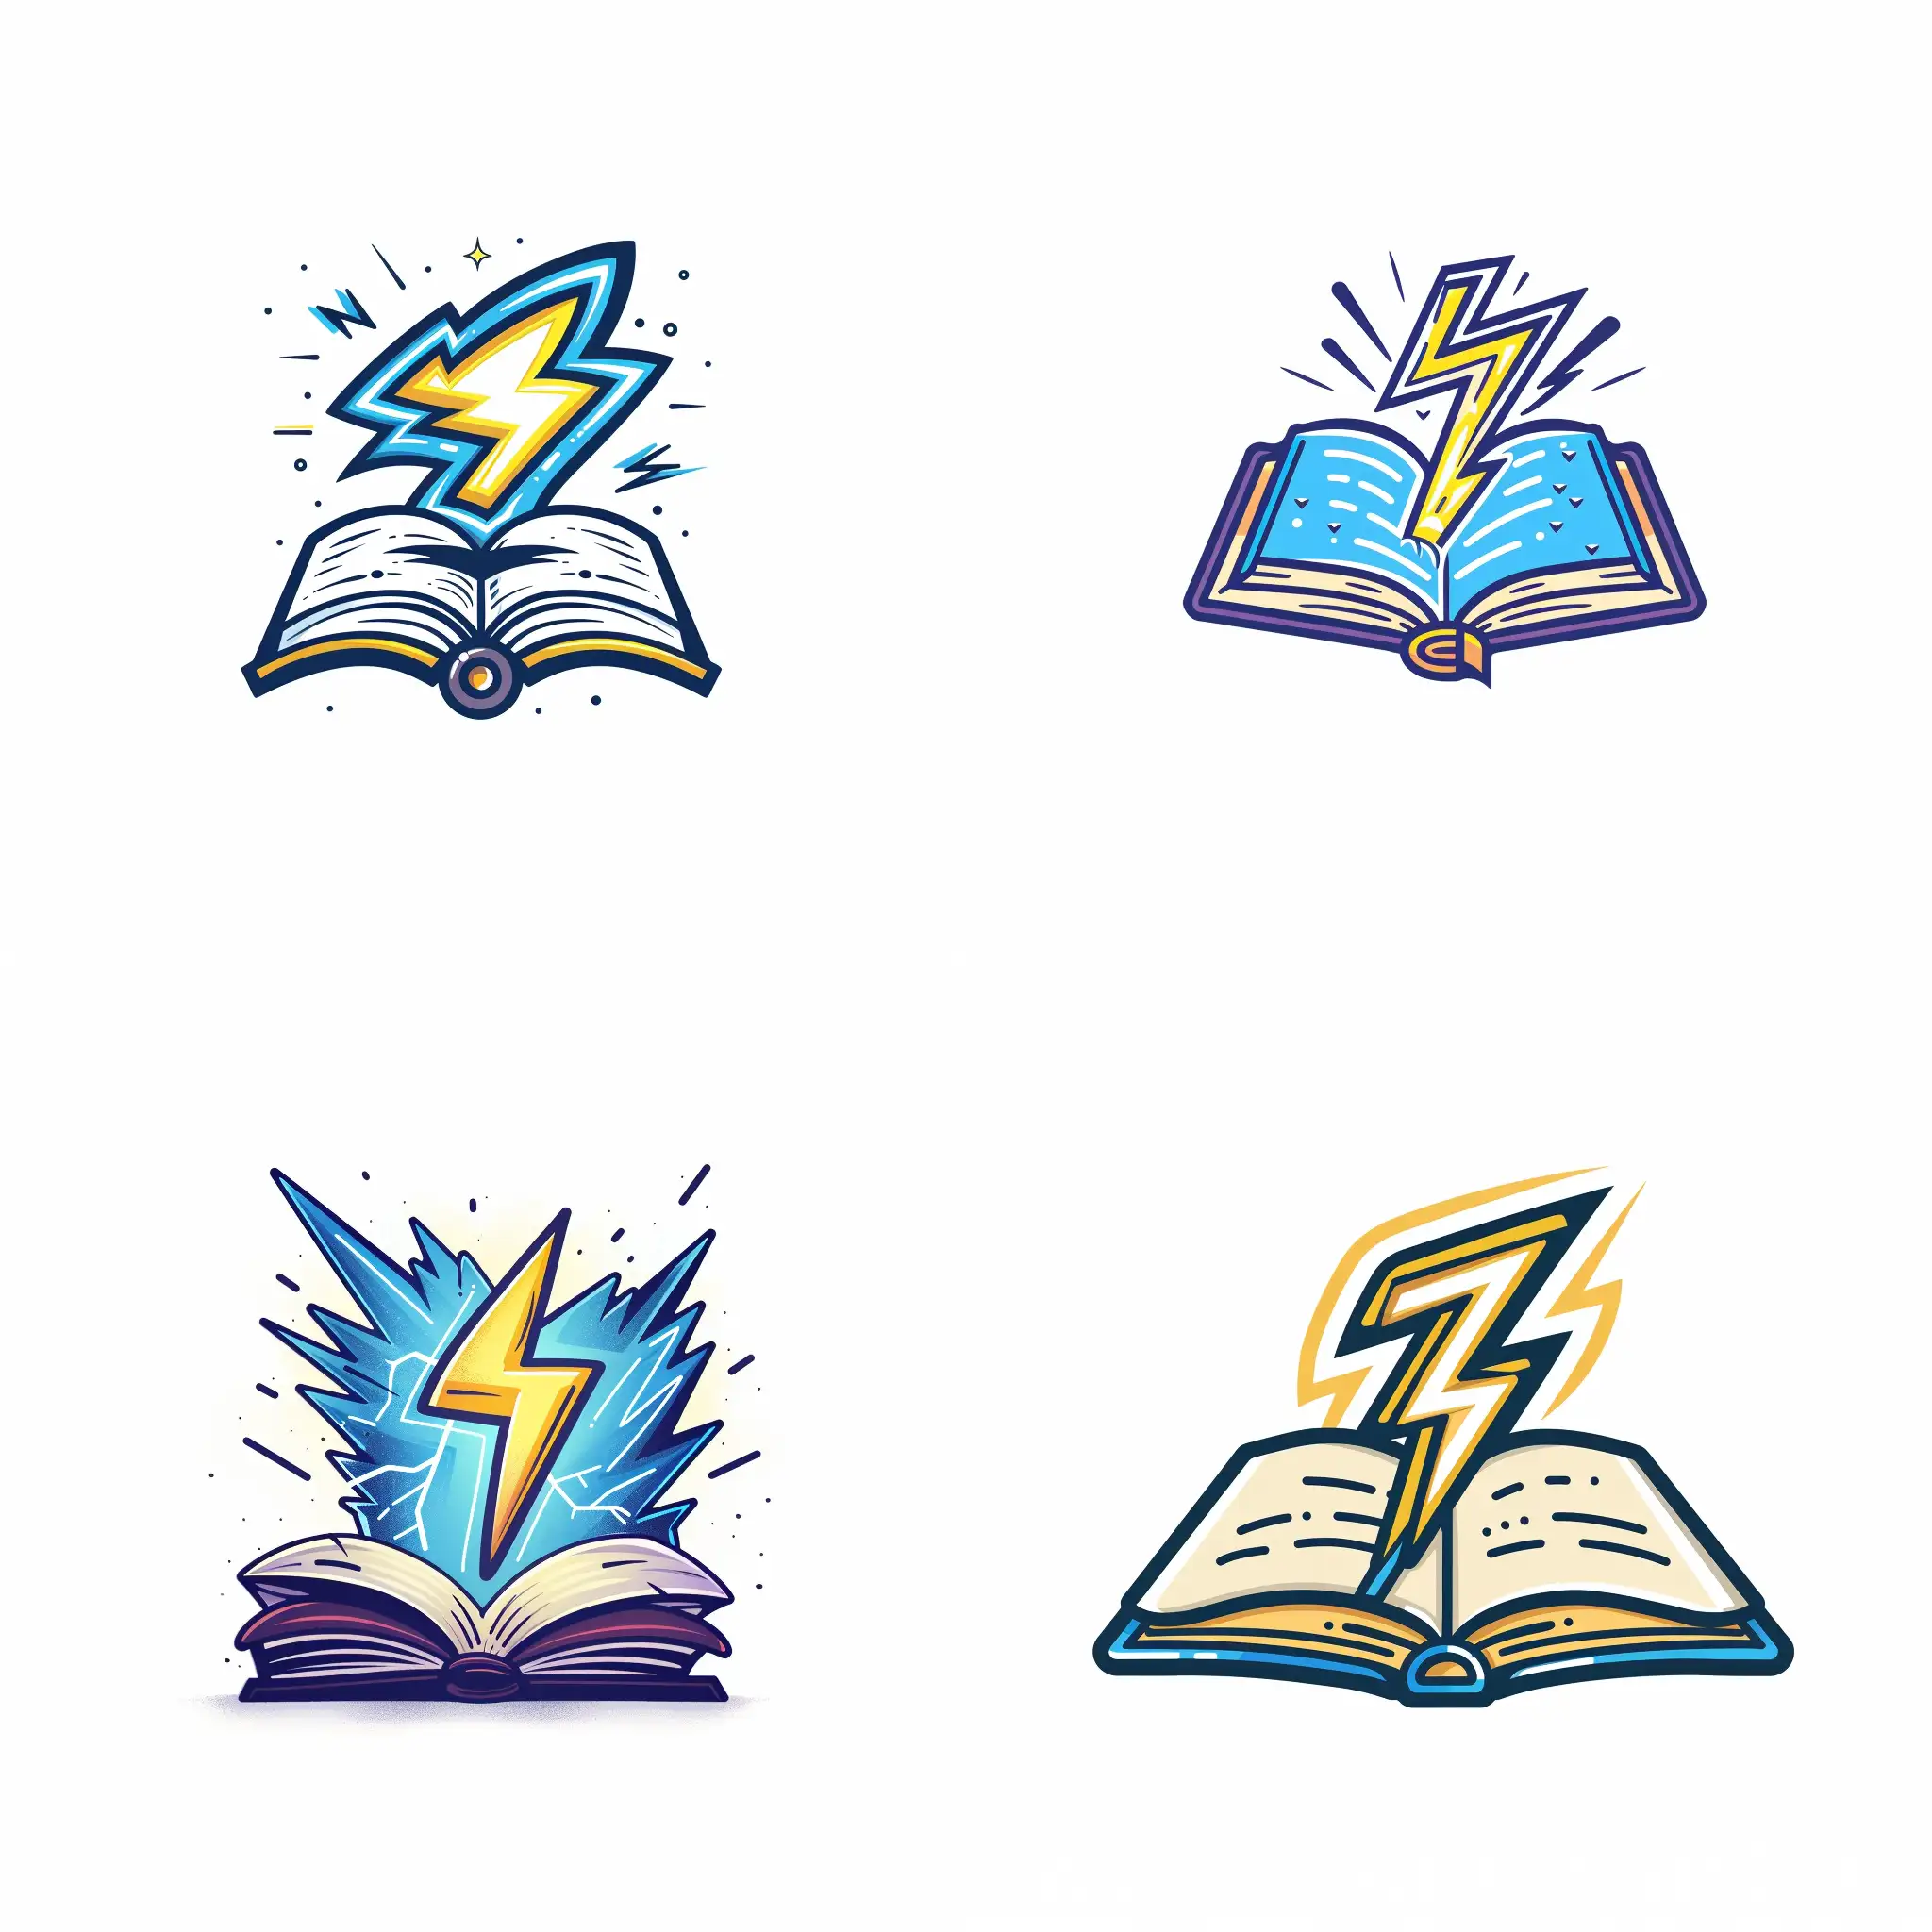 Make me a logo for my education platform company on a white background that is cartoon style of a lightning bolt going through a book.